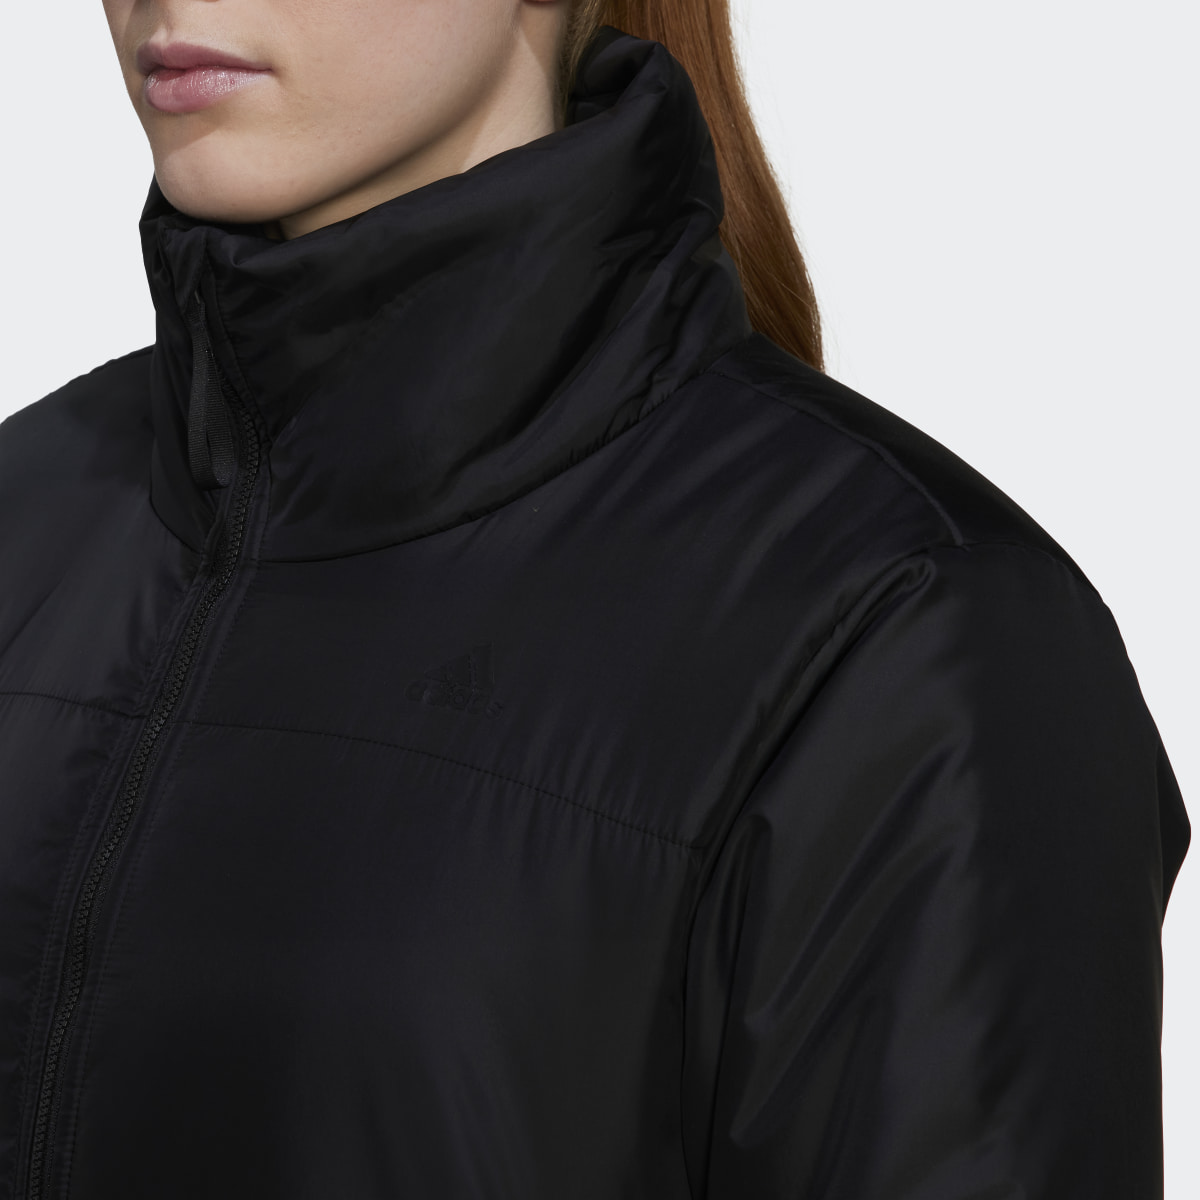 Adidas BSC Insulated Jacket. 8